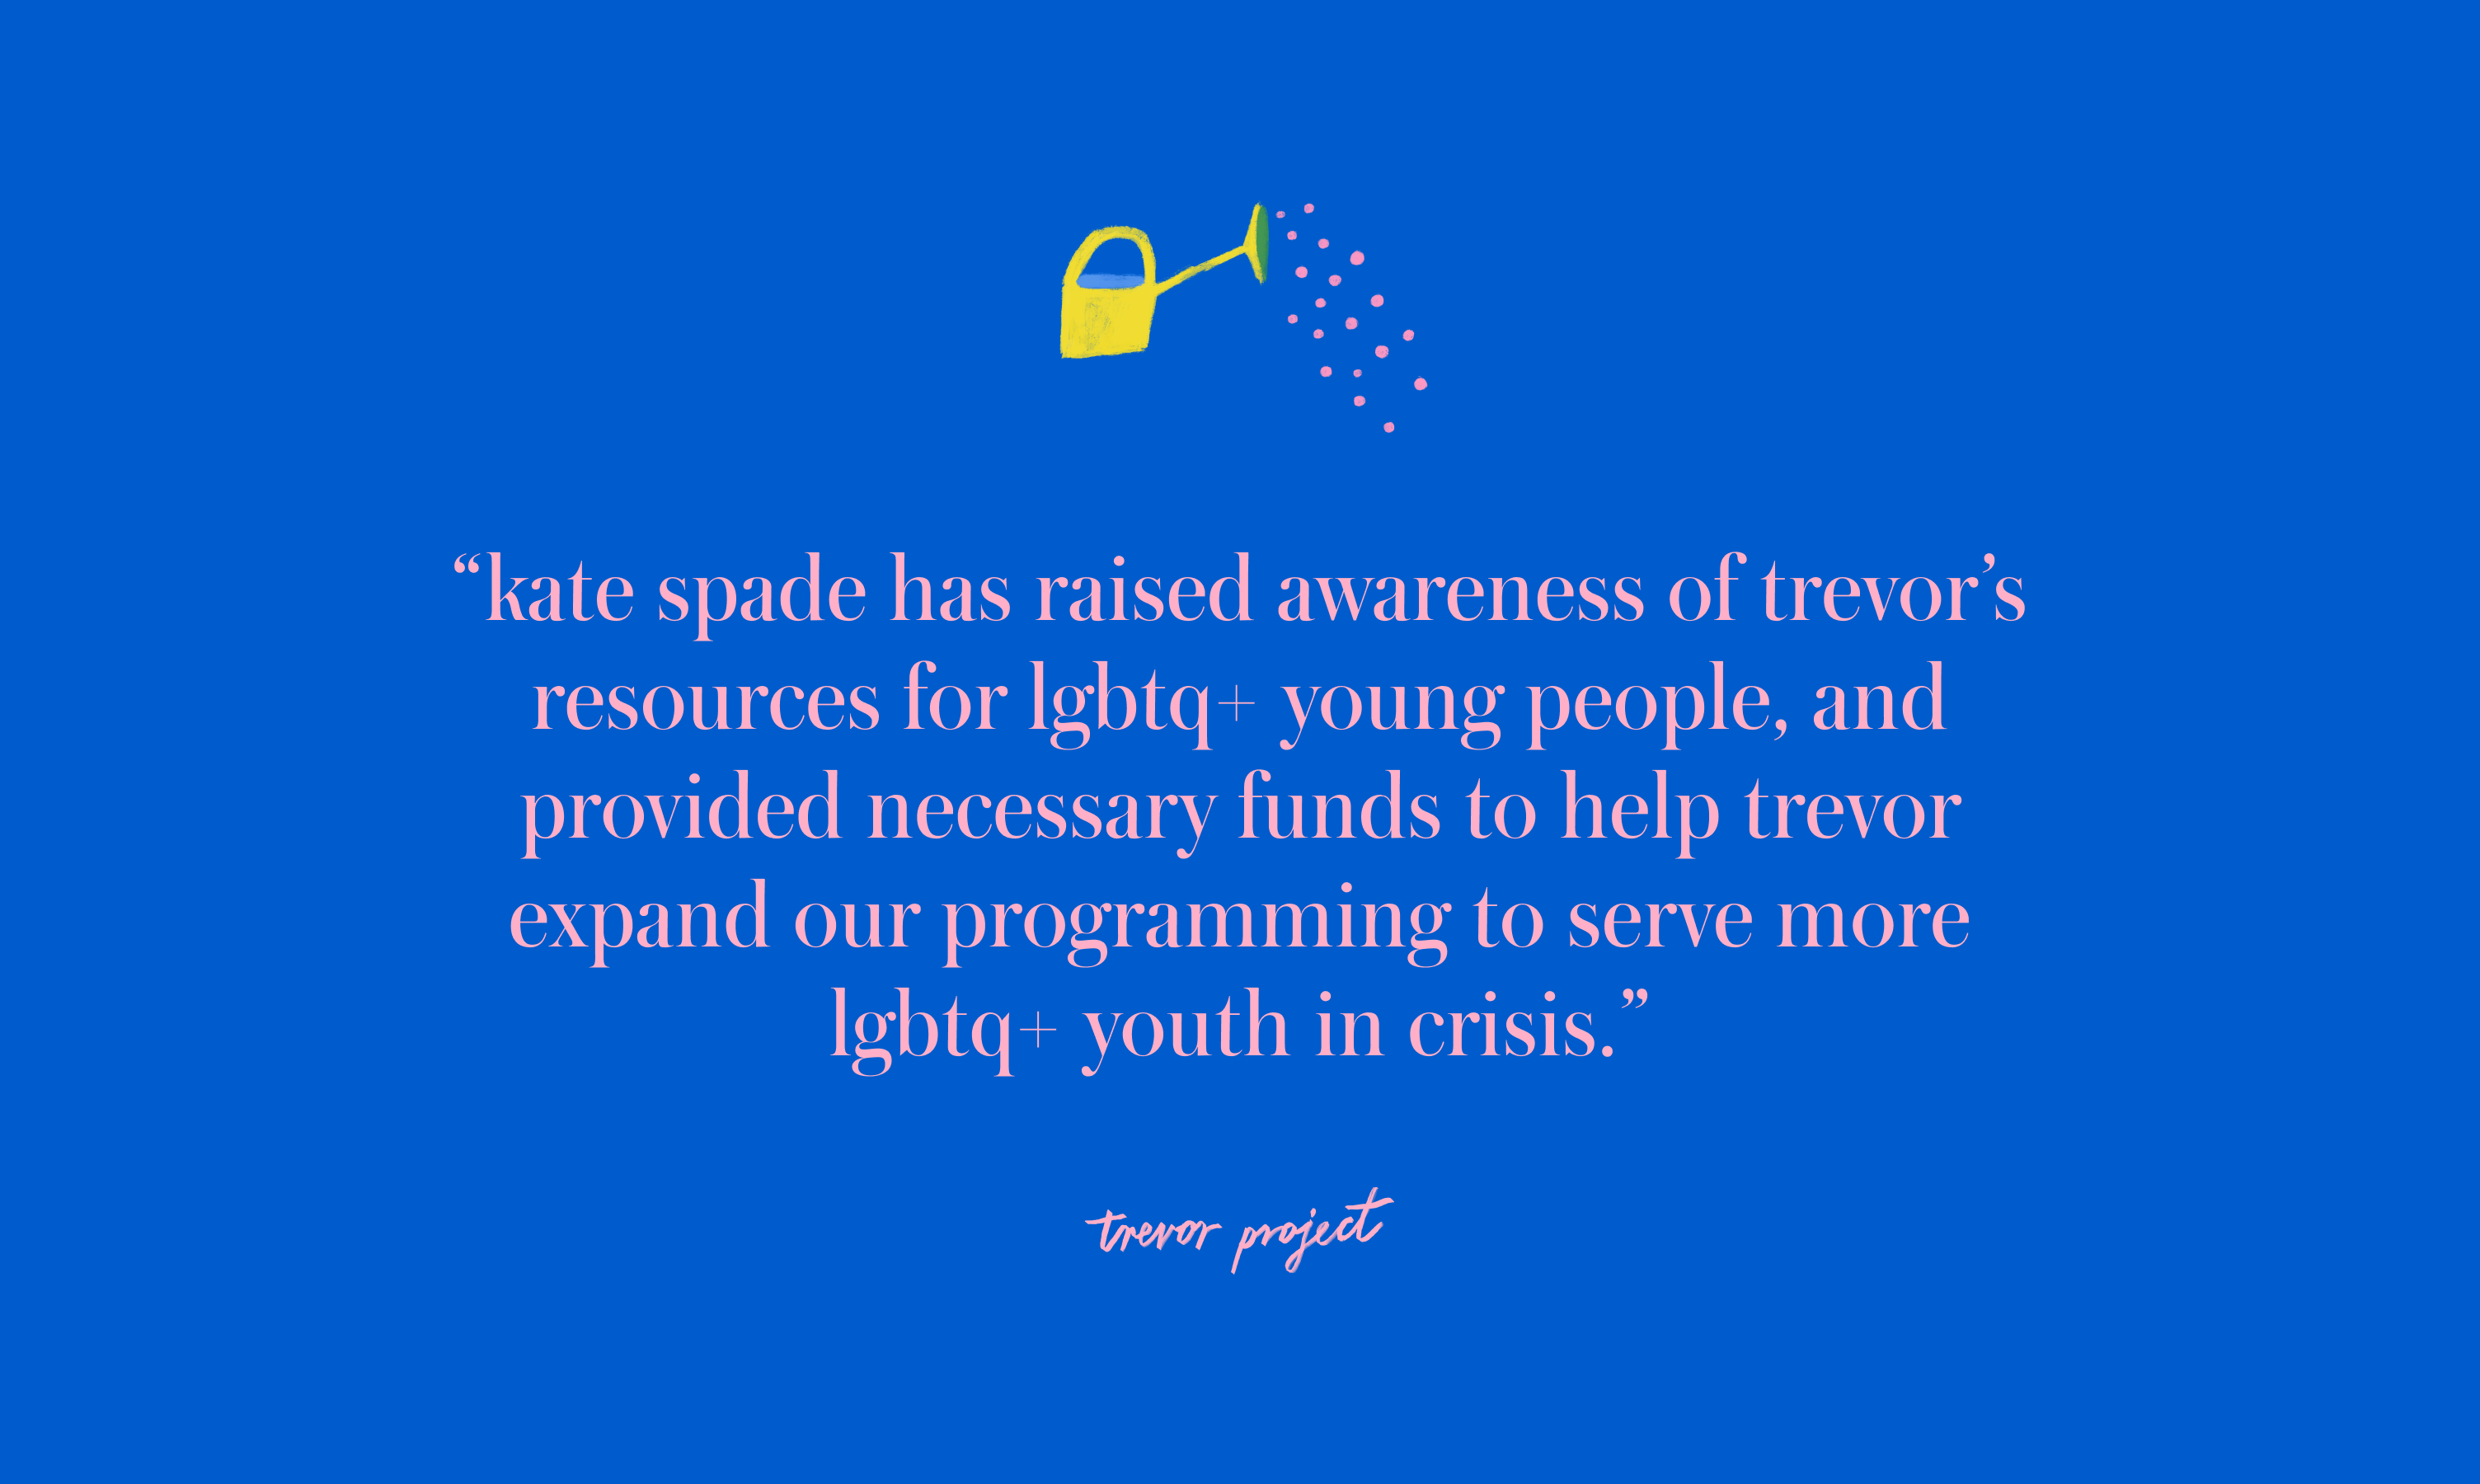 kate spade has raised awareness of Trevor's resources for LGBTQ+
												young people, and provided
												necessary funds to help Trevor expand our programming to serve more
												LGBTQ+ youth in crisis.